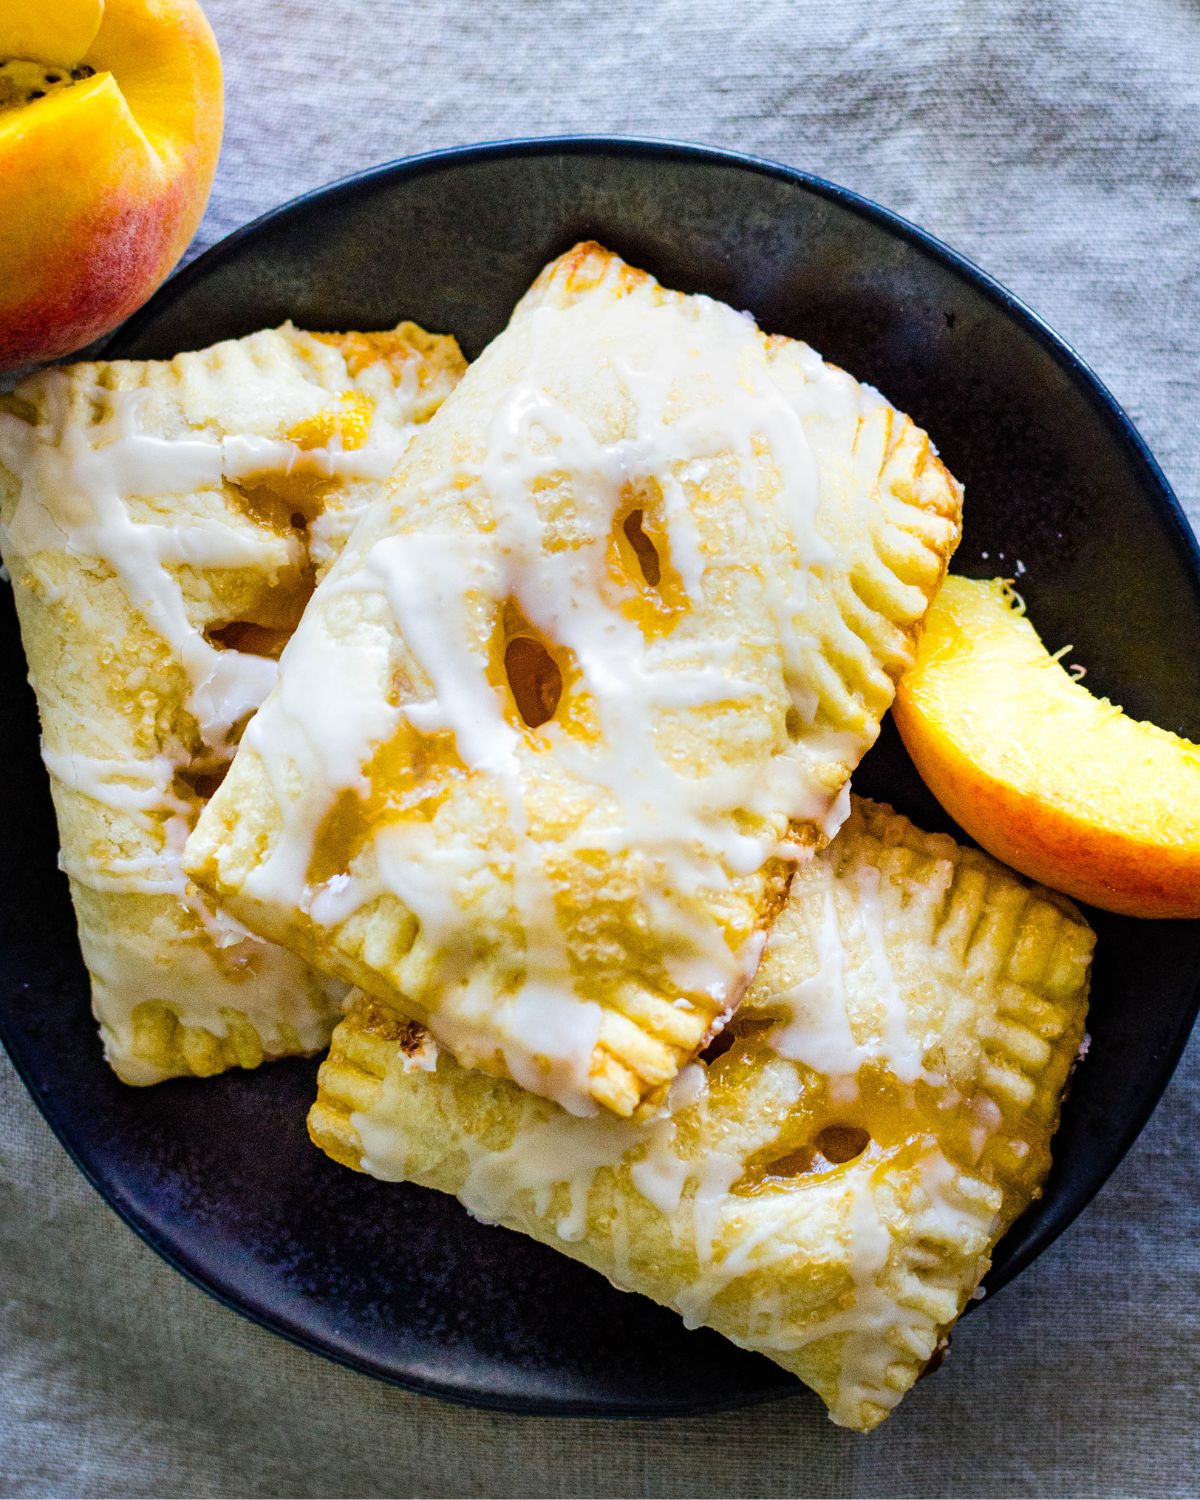 A plate filled with peach hand pies.